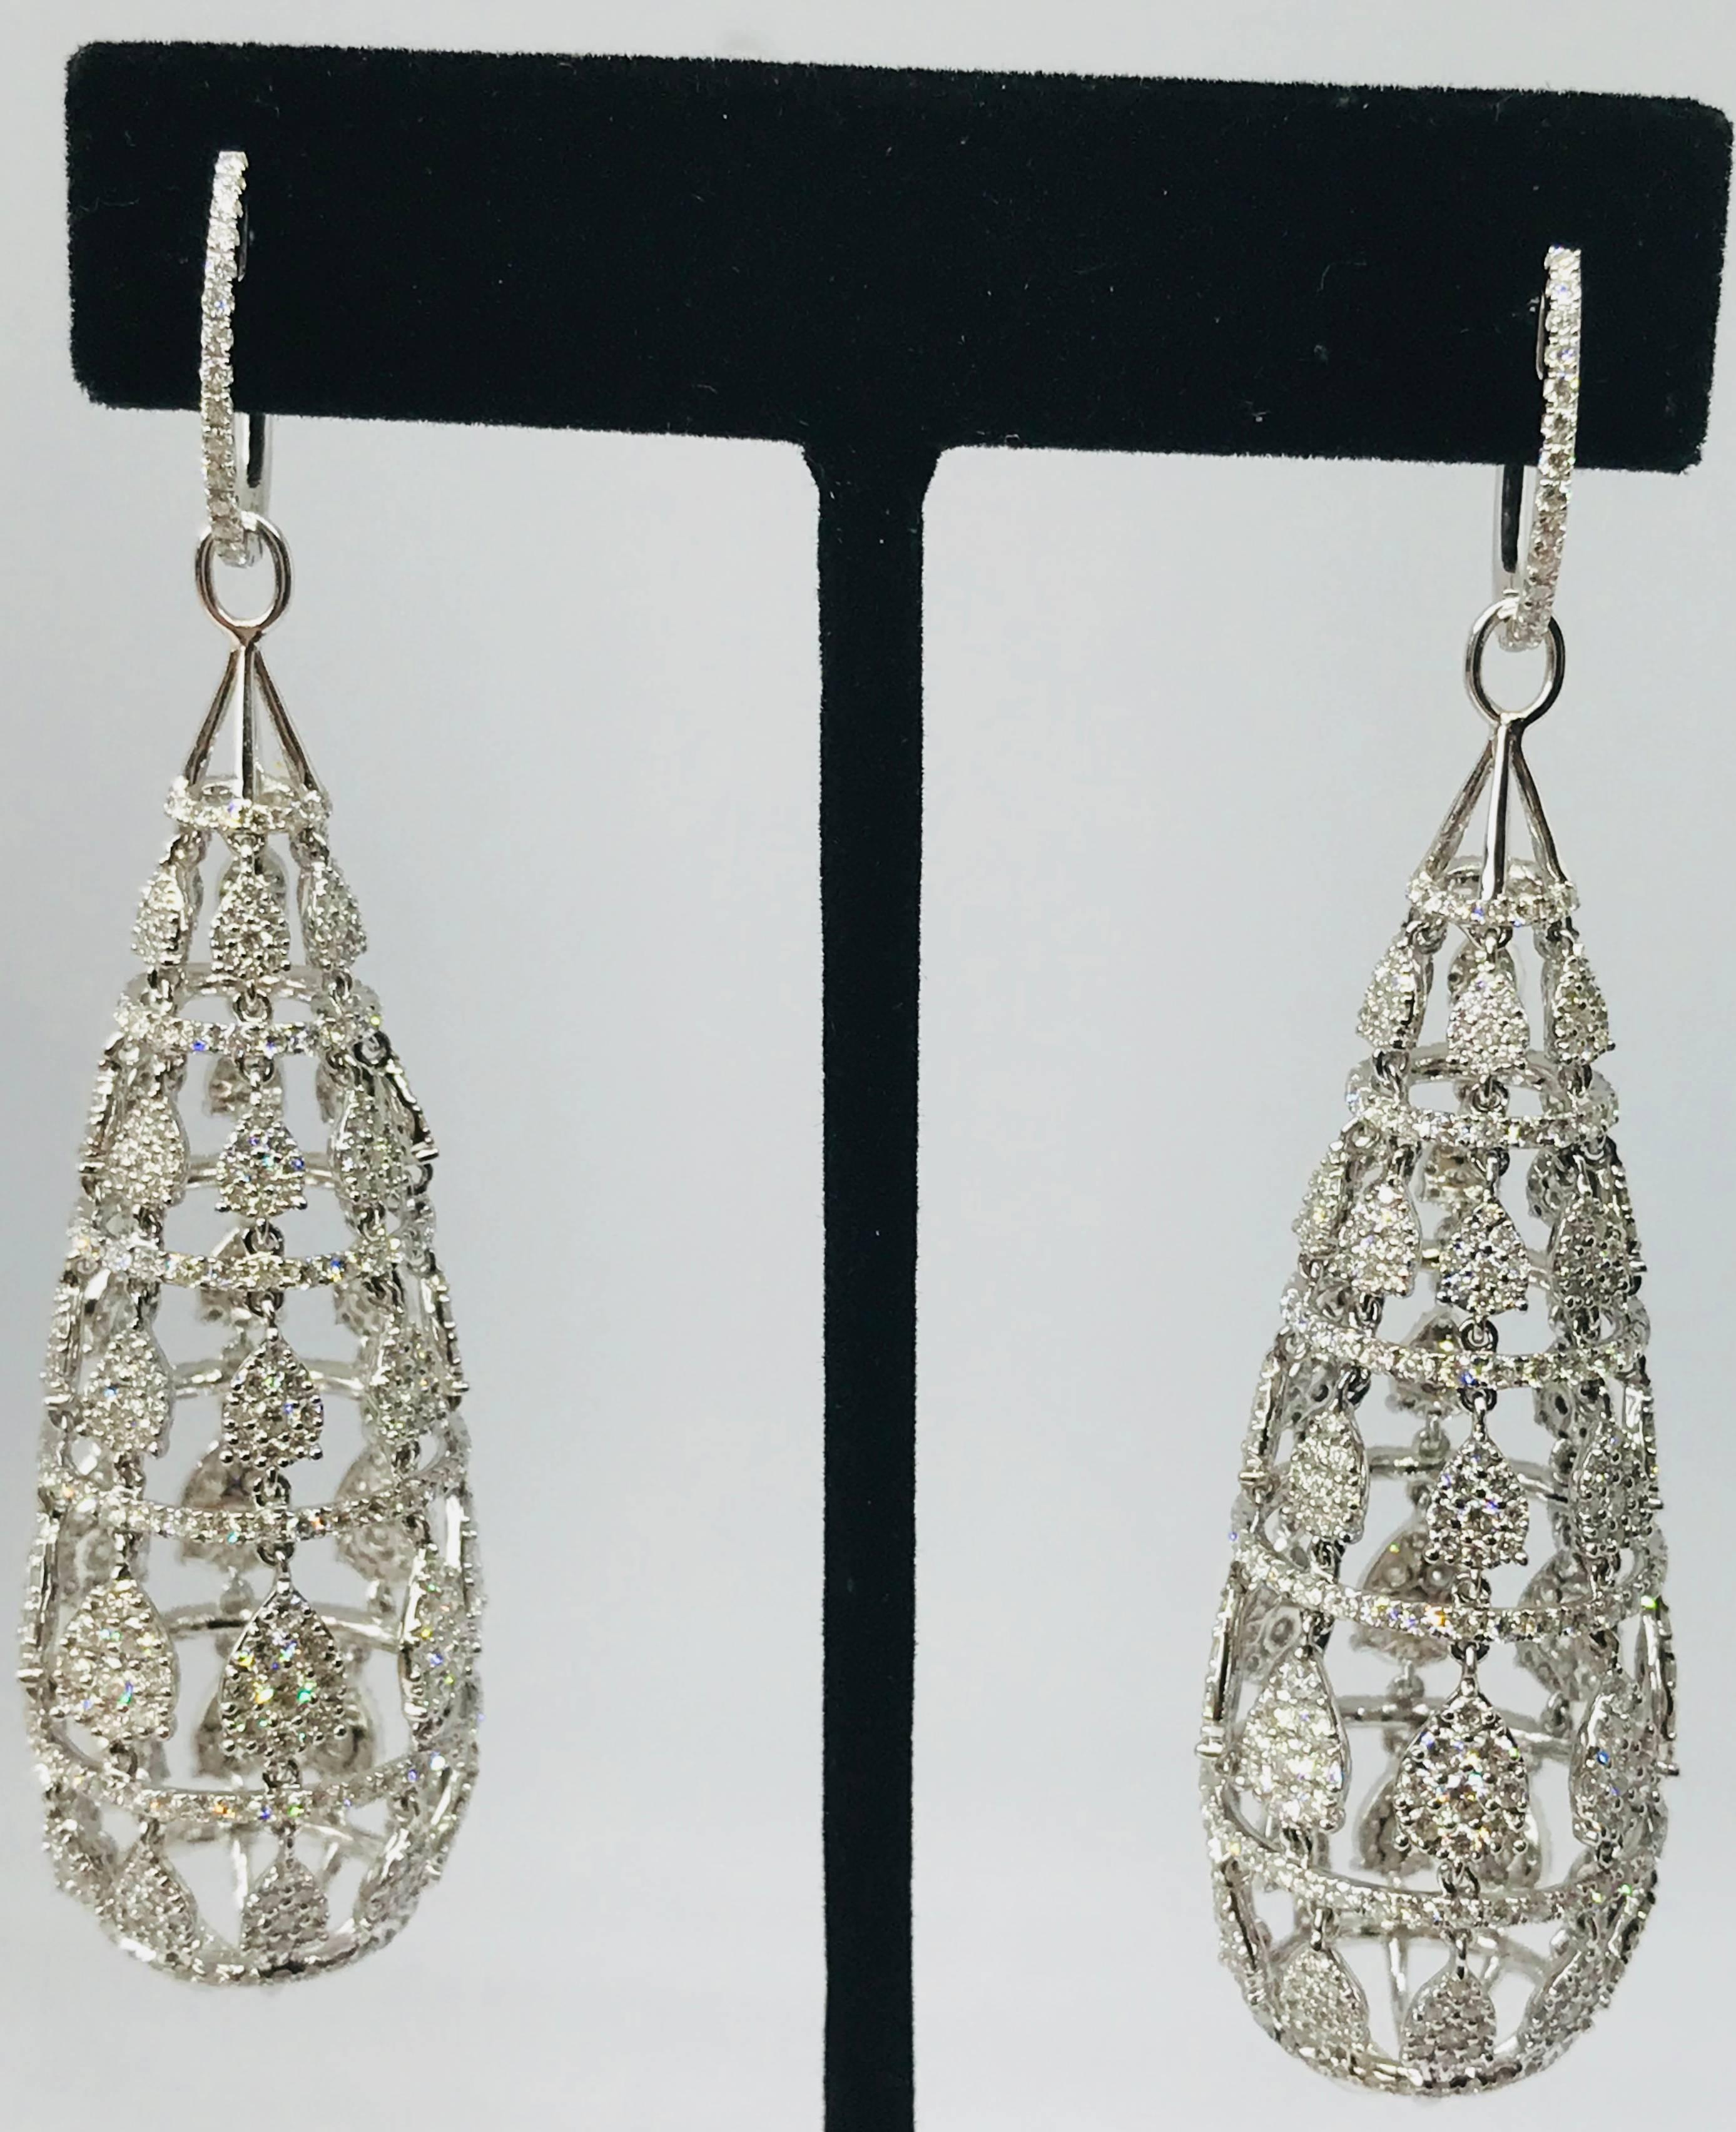 Top Quality 11.66 carat Diamond Hanging Earrings in 18k White Gold 28.85 grams In New Condition For Sale In New York, NY